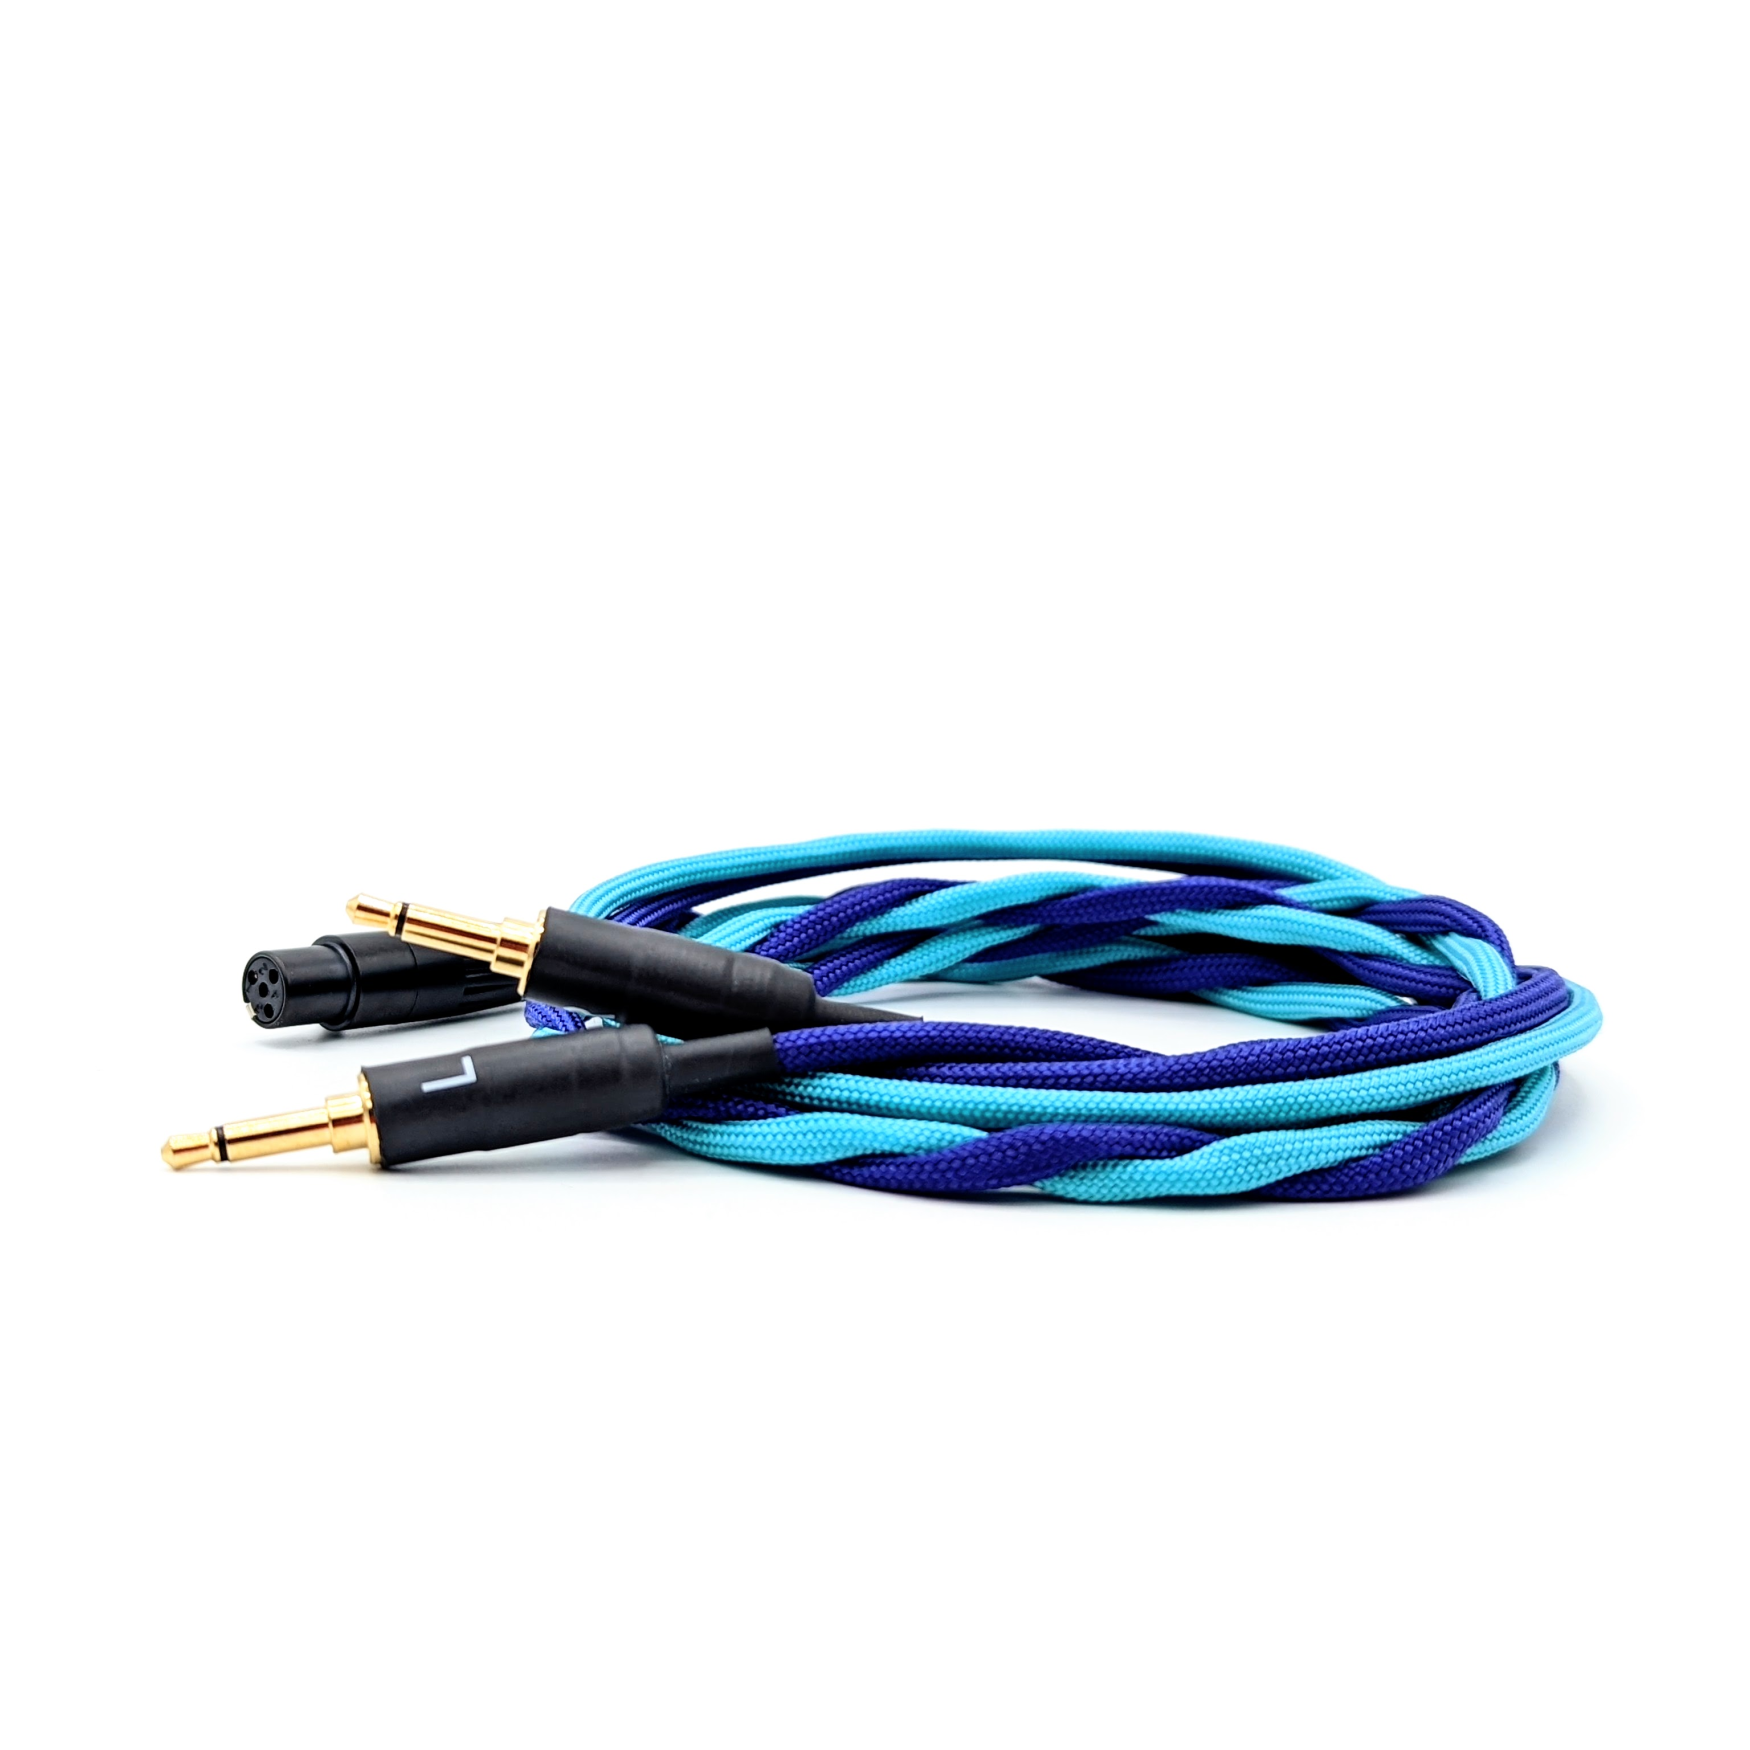 Dual 3.5mm Cable for Hifiman, Focal headphones and more – Hart